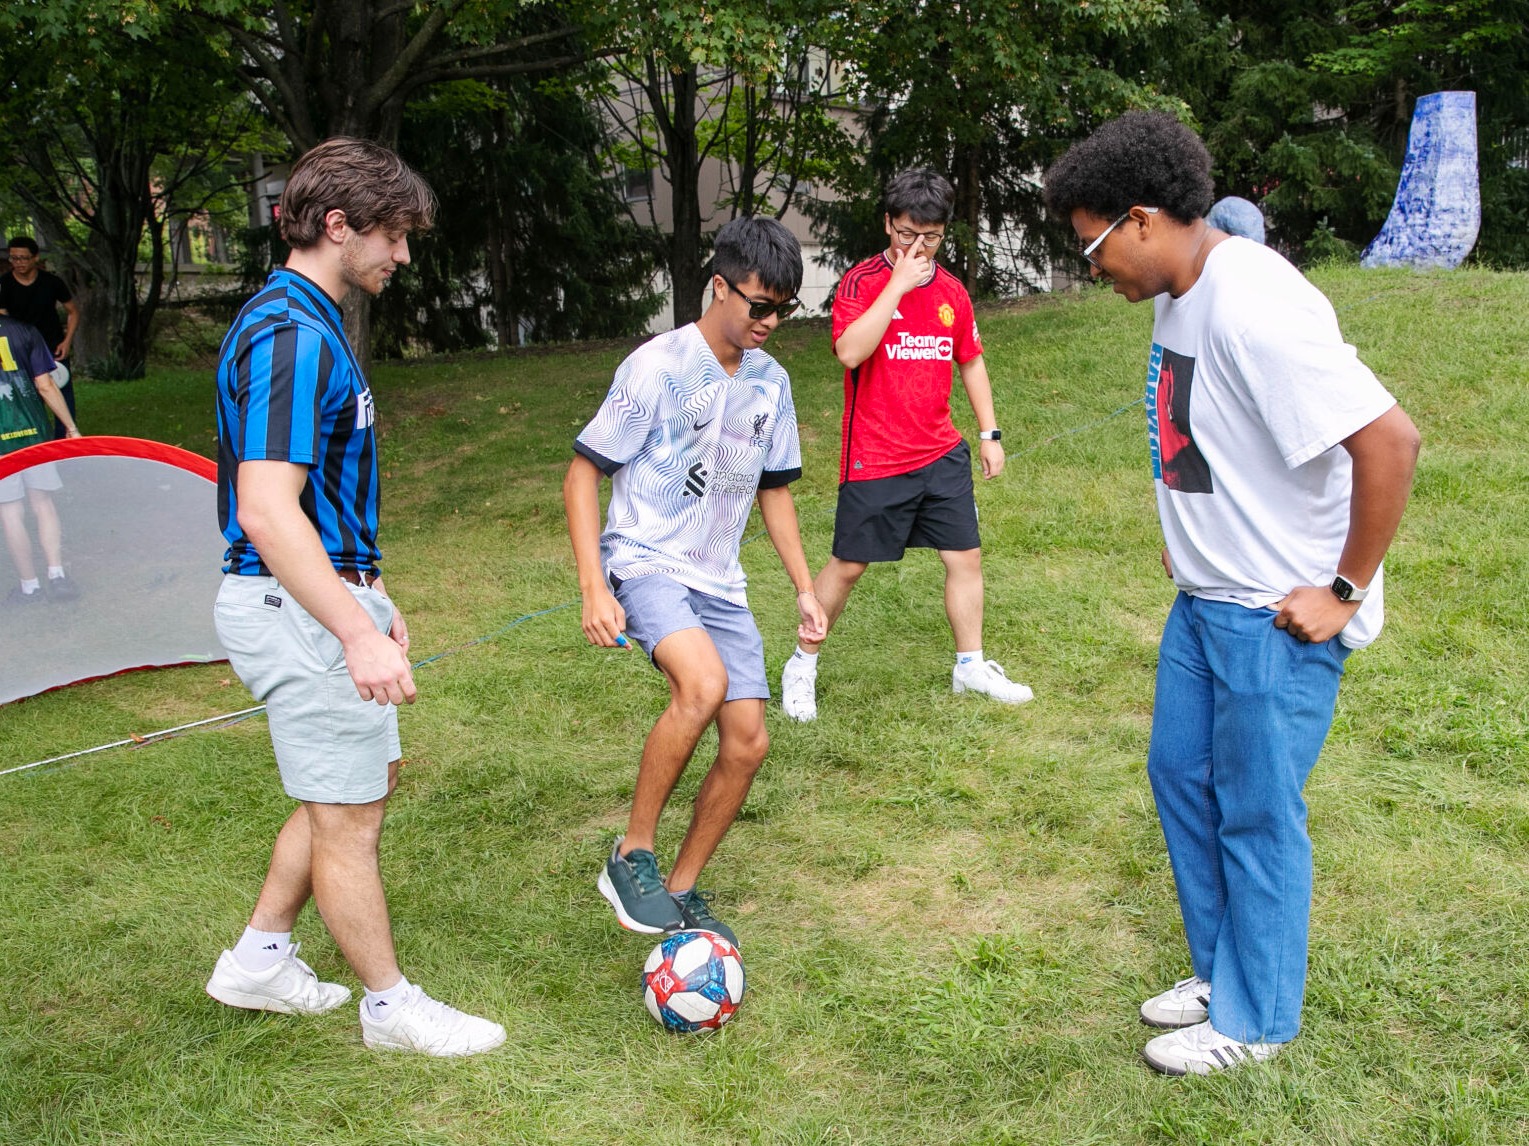 Four students play soccer on ¼ϲʿ's South Lawn.